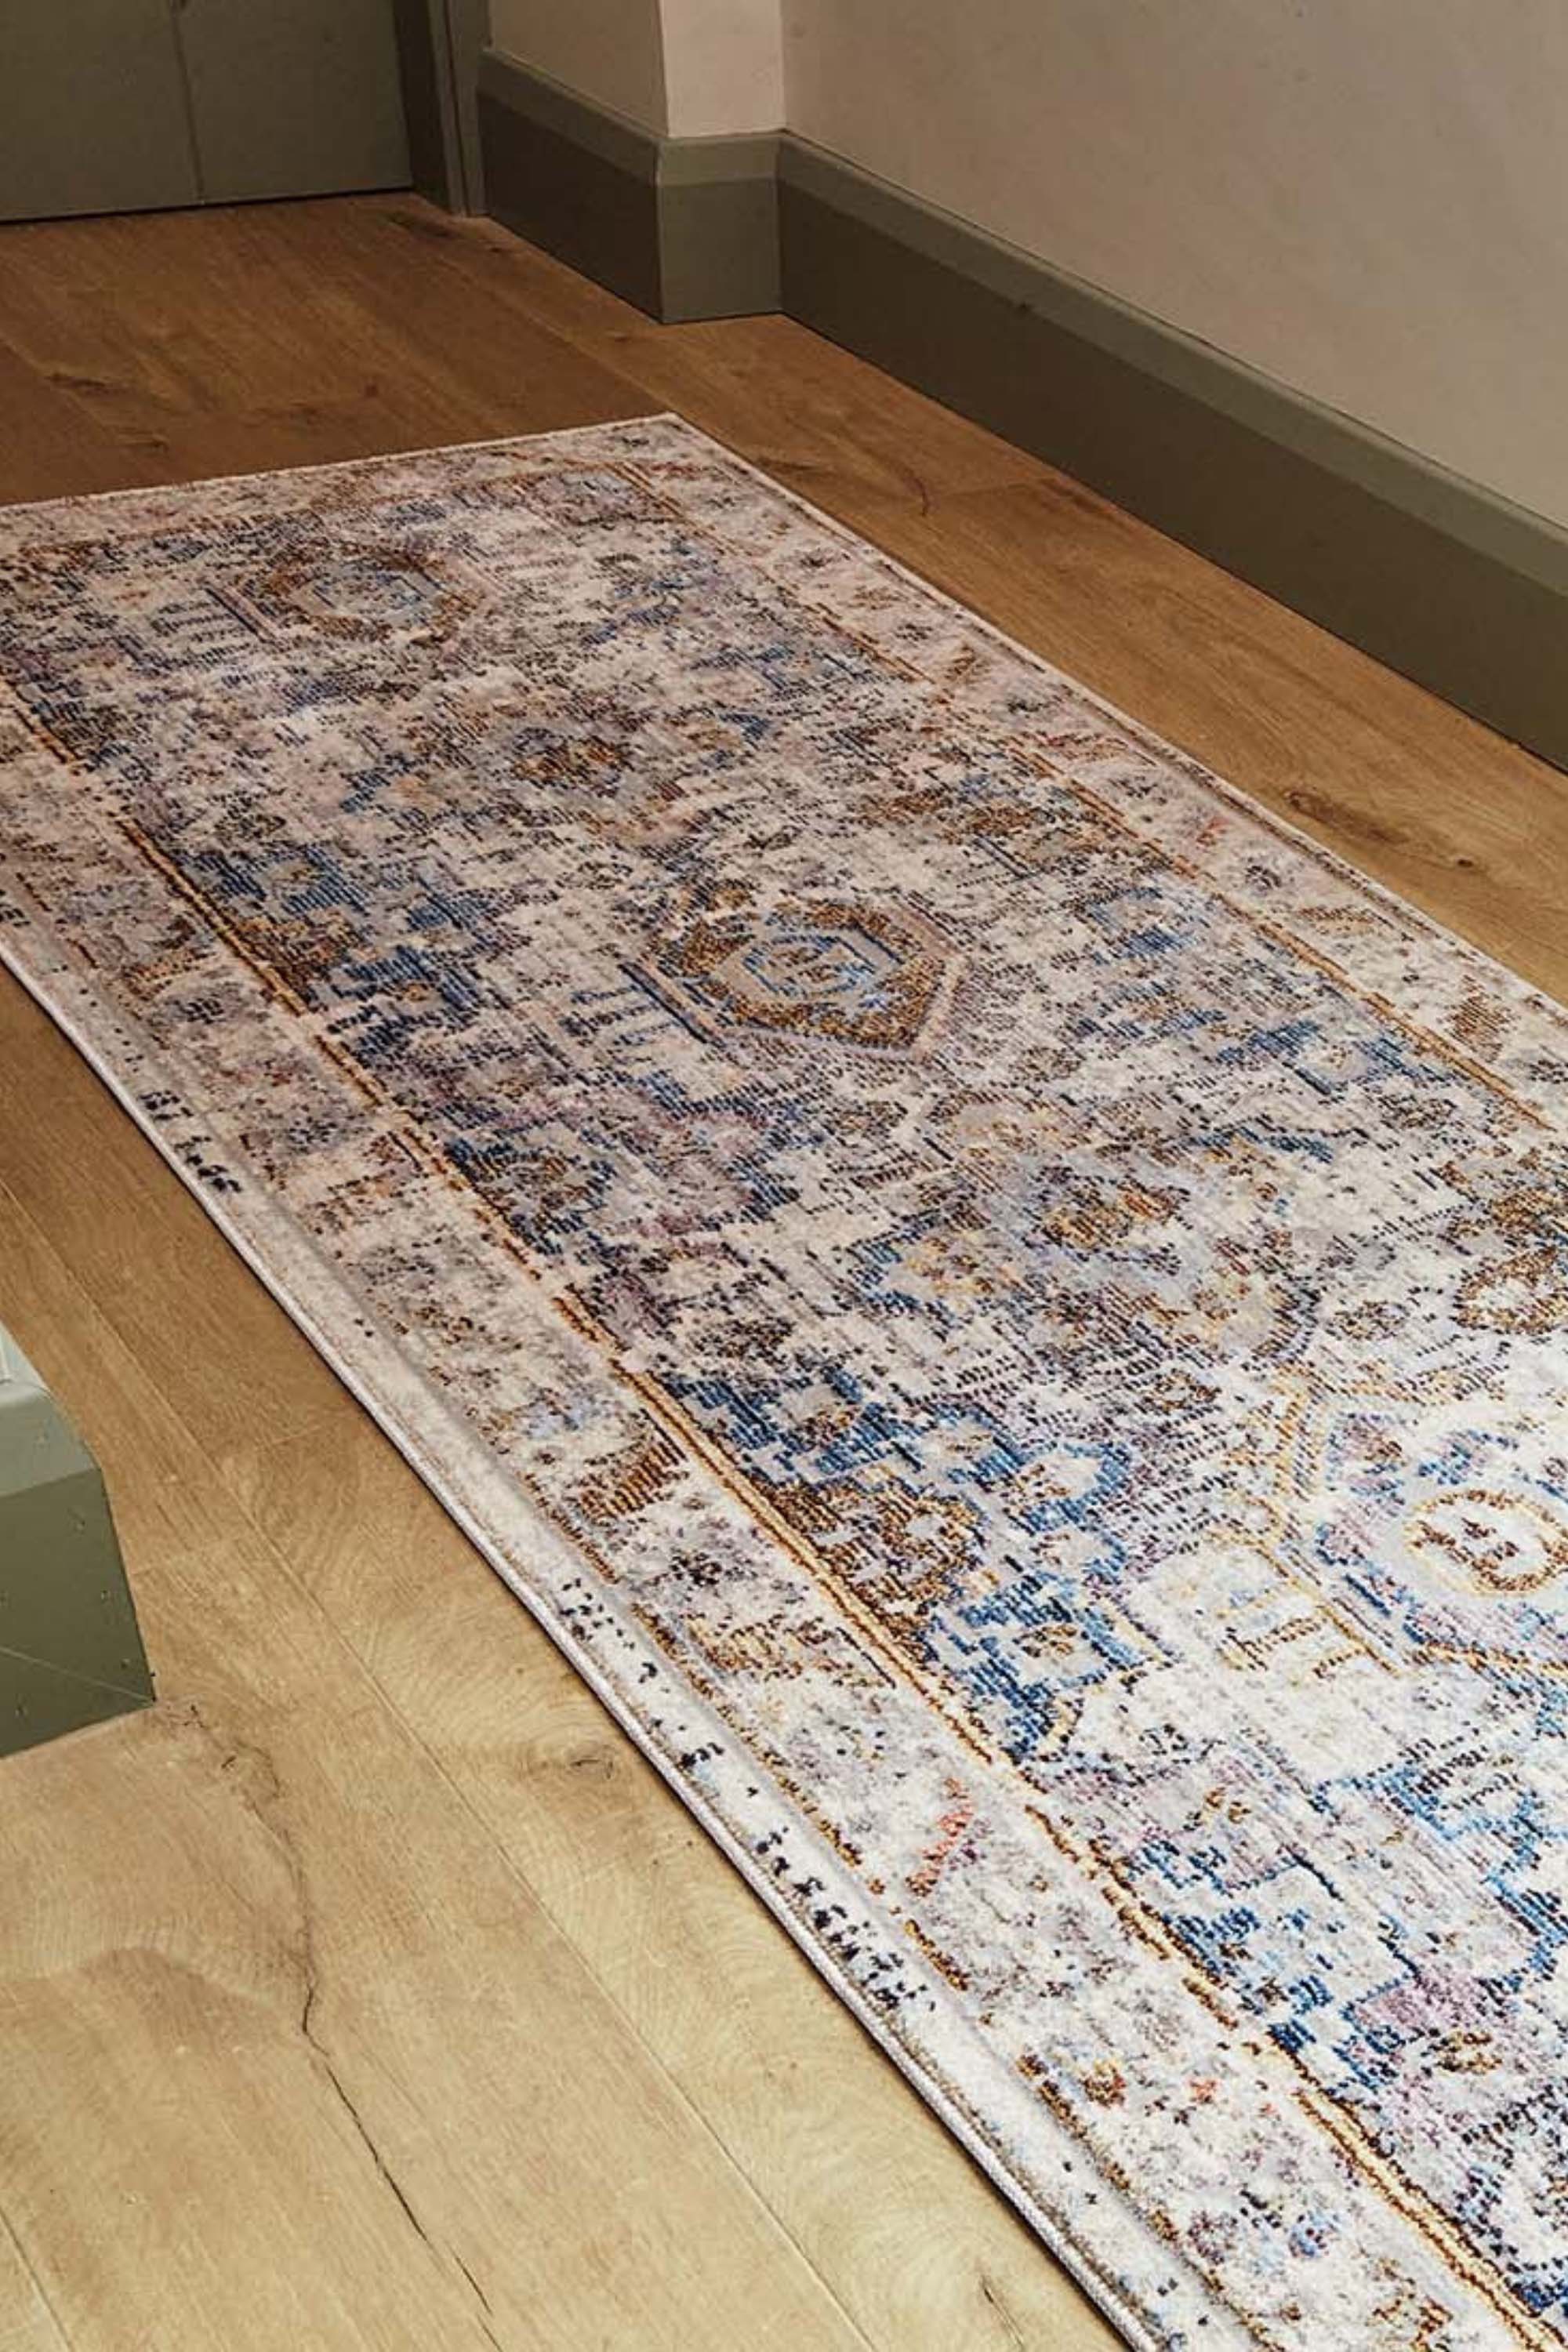 Persian style runner in beige, blue and gold